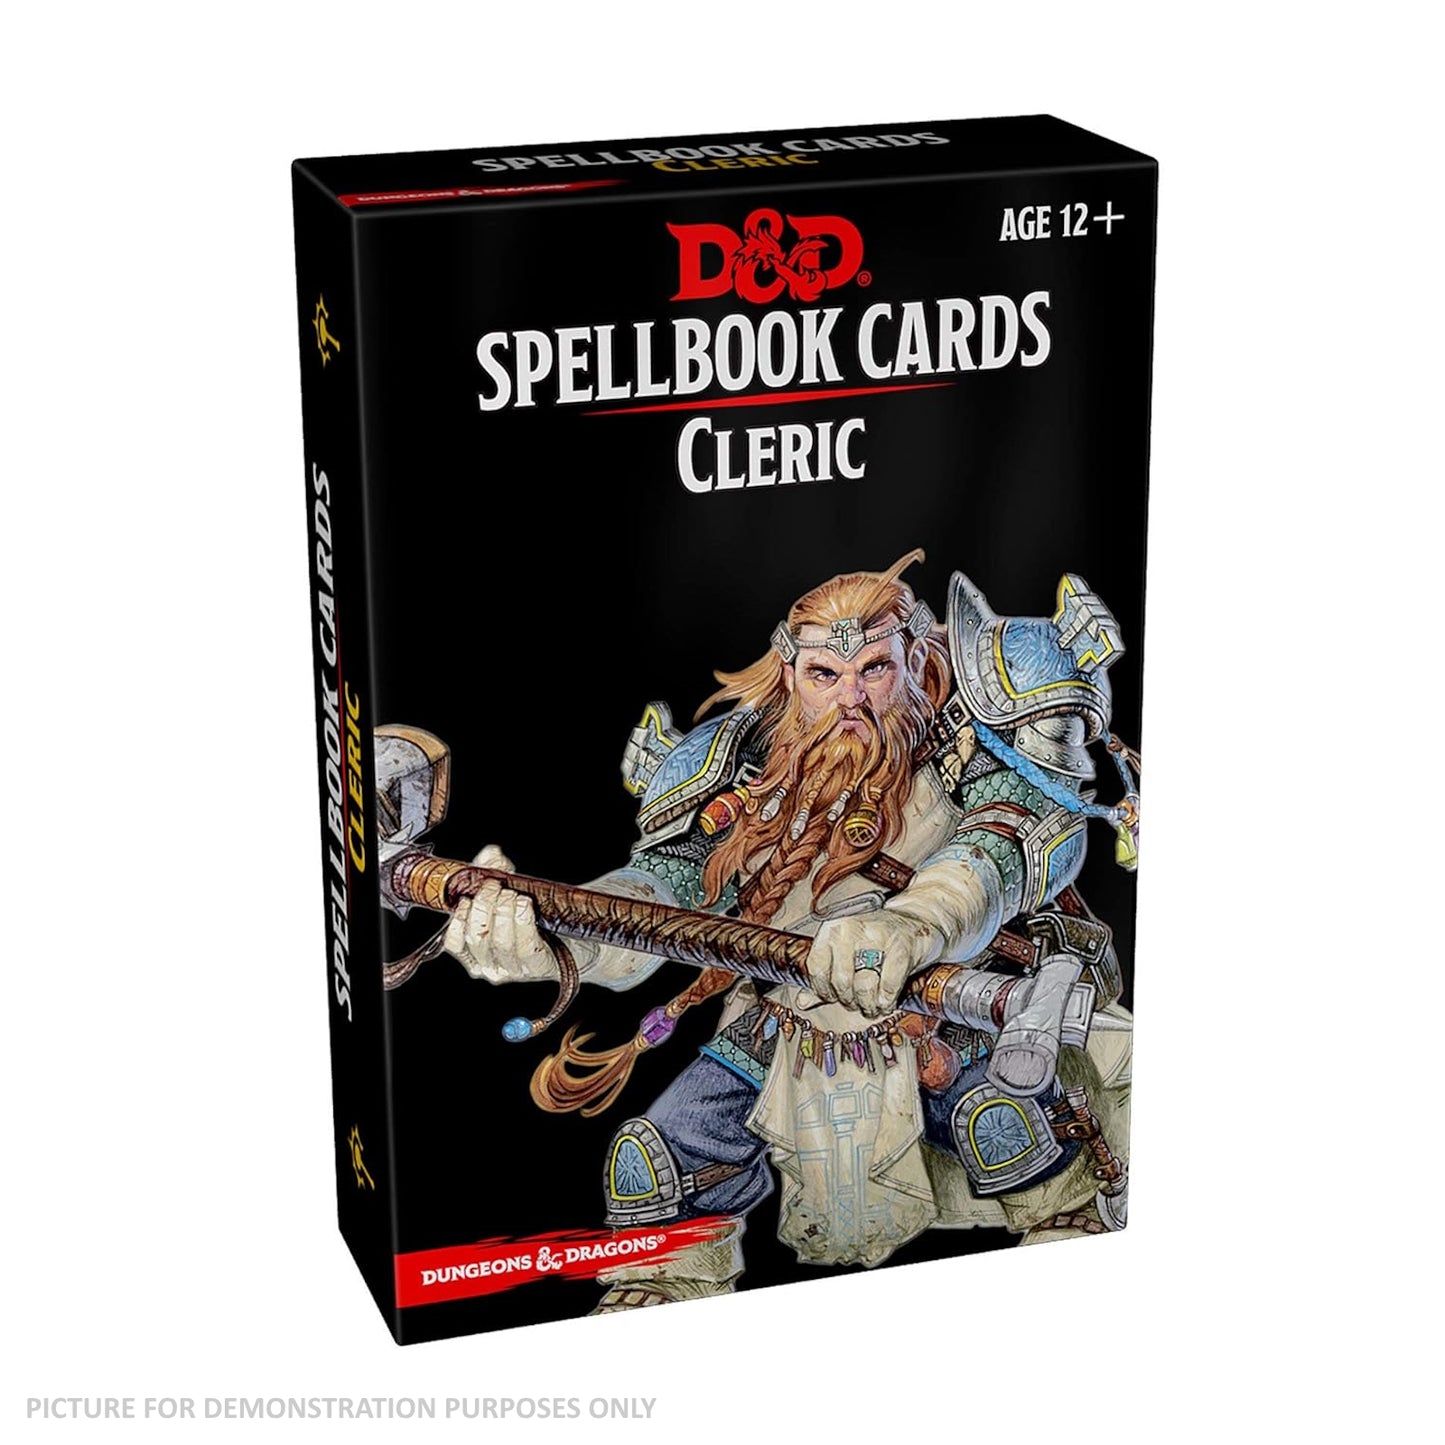 Dungeons & Dragons Spellbook Cards Cleric Deck Revised 2017 Edition